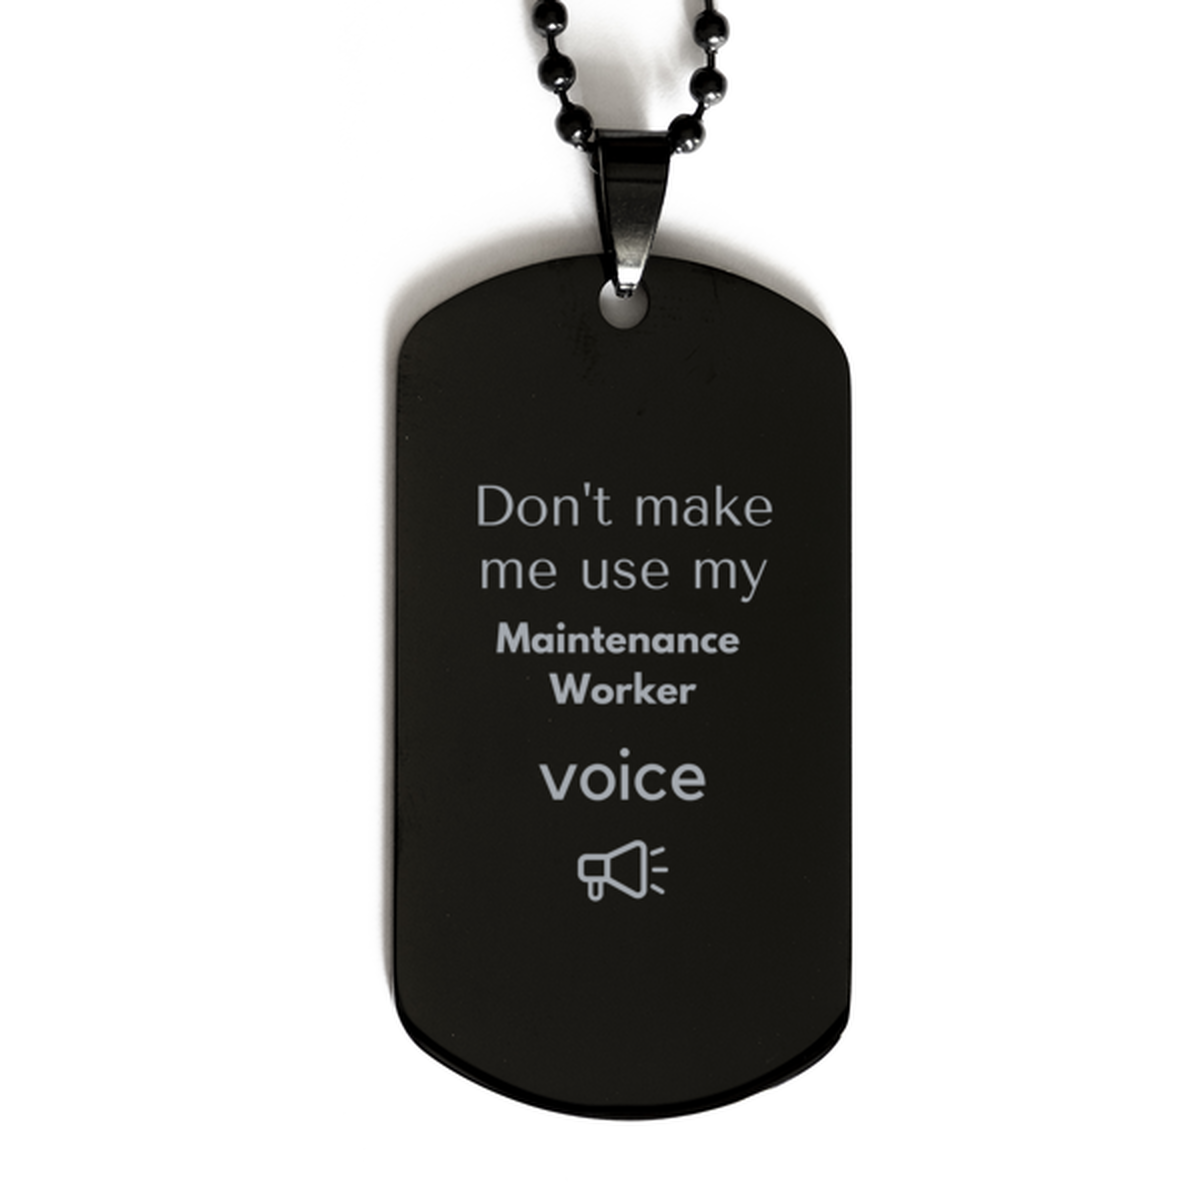 Don't make me use my Maintenance Worker voice, Sarcasm Maintenance Worker Gifts, Christmas Maintenance Worker Black Dog Tag Birthday Unique Gifts For Maintenance Worker Coworkers, Men, Women, Colleague, Friends